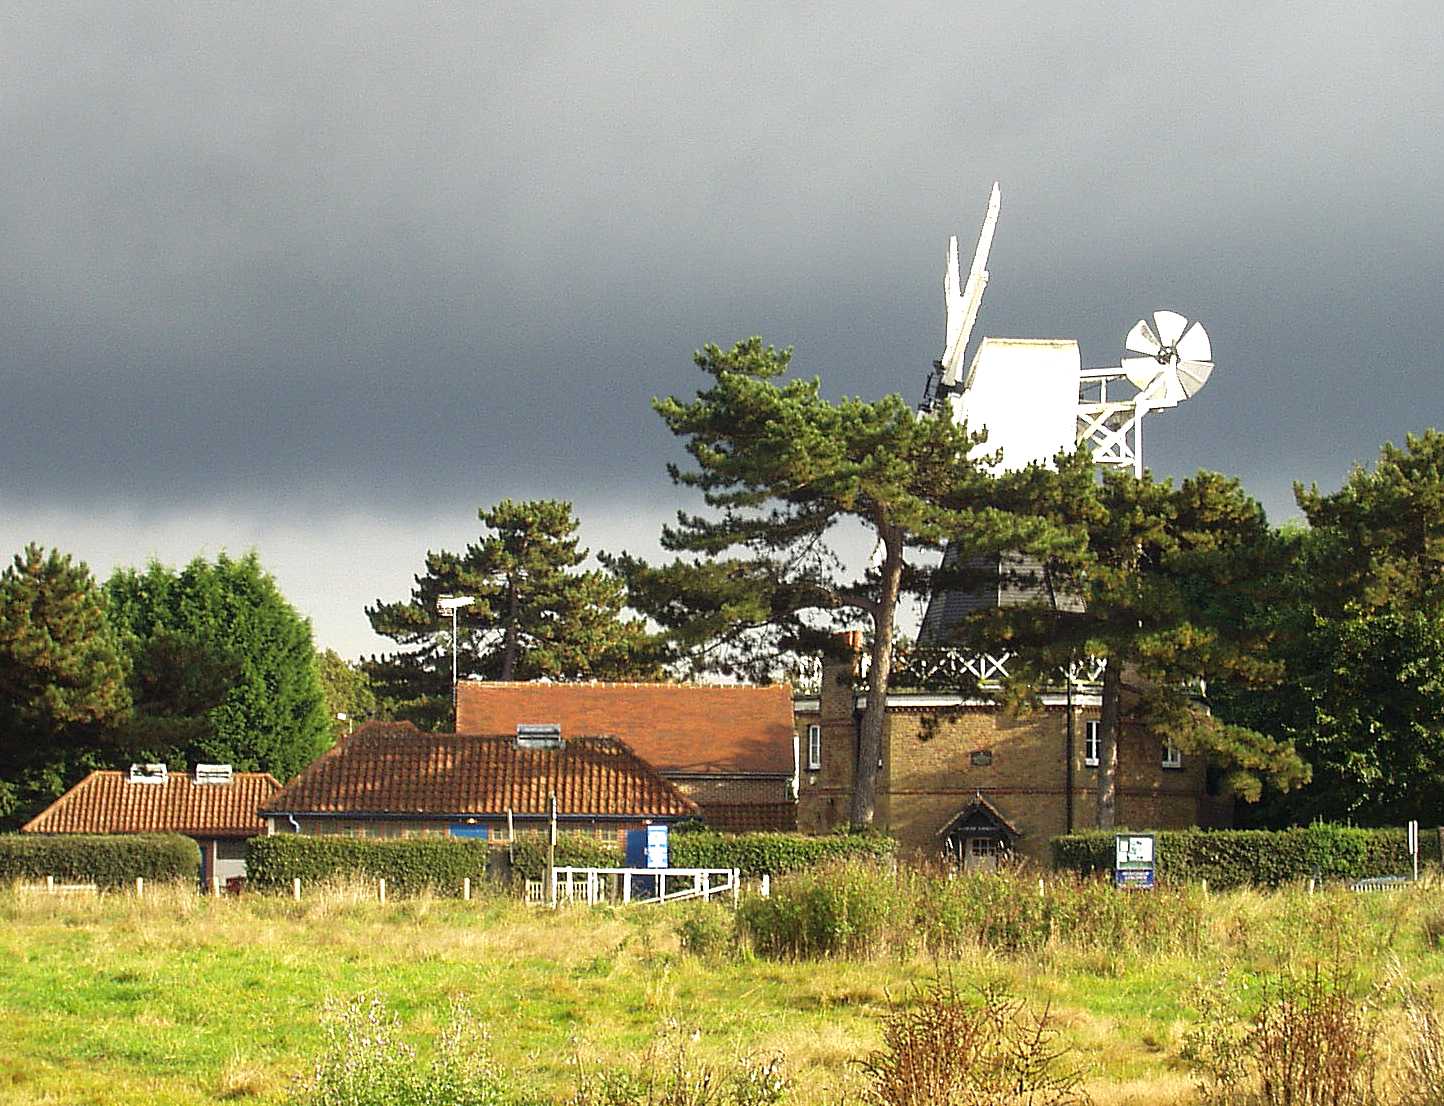 Boy Scouts, Beavers, Scout Leaders, Venture Scouts, Explorer Scouts, Girl
Guides, Brownies and Girl Scouts should visit Wimbledon Common Windmill because
of its connections with Lord Baden Powell